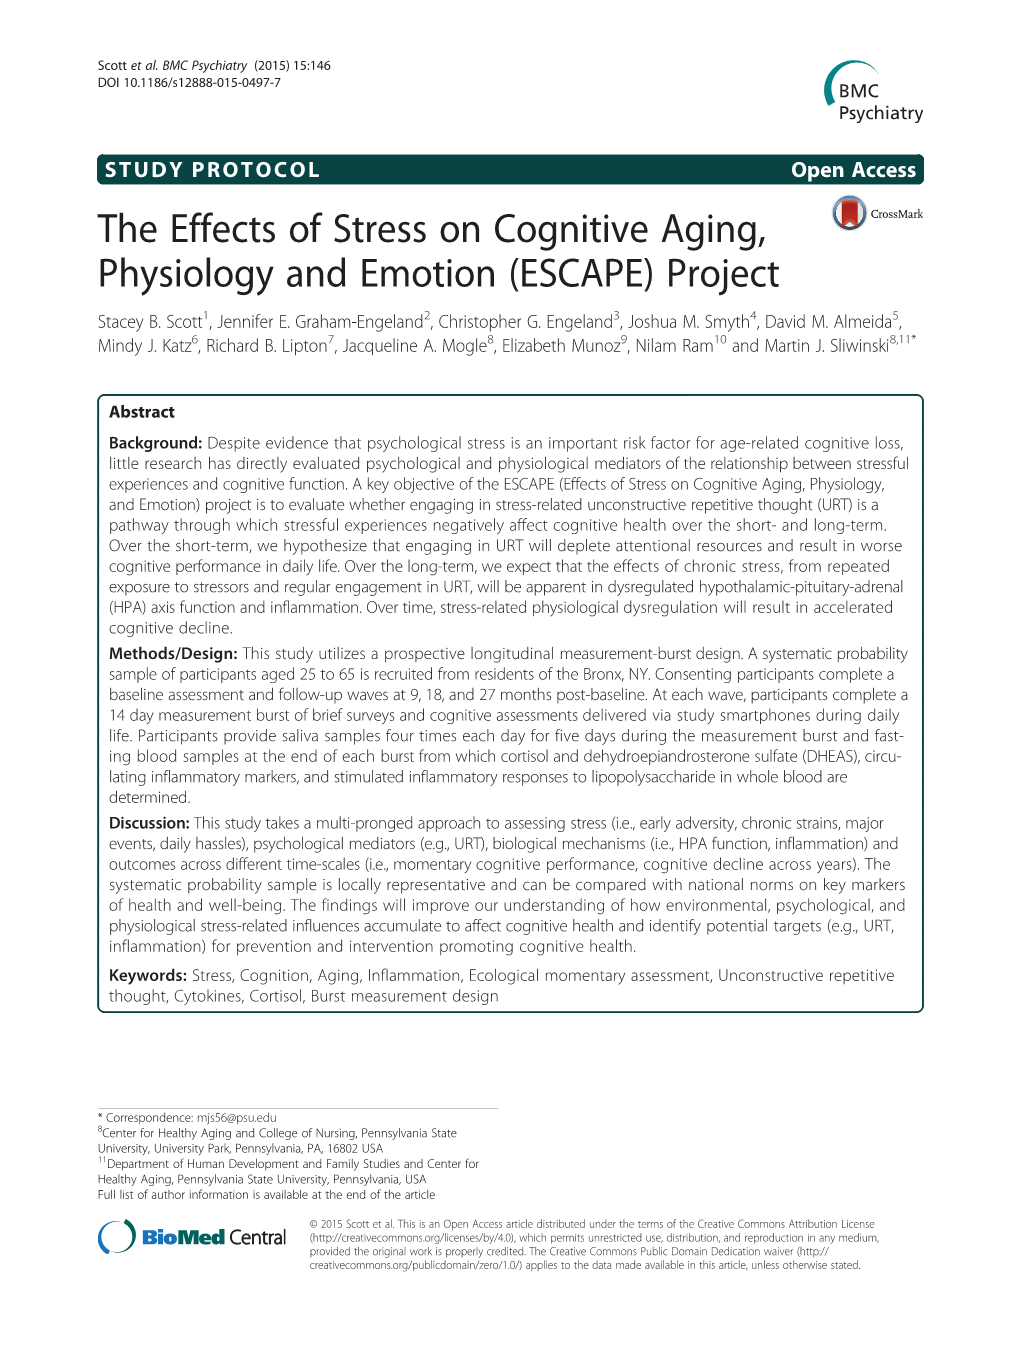 The Effects of Stress on Cognitive Aging, Physiology and Emotion (ESCAPE) Project Stacey B